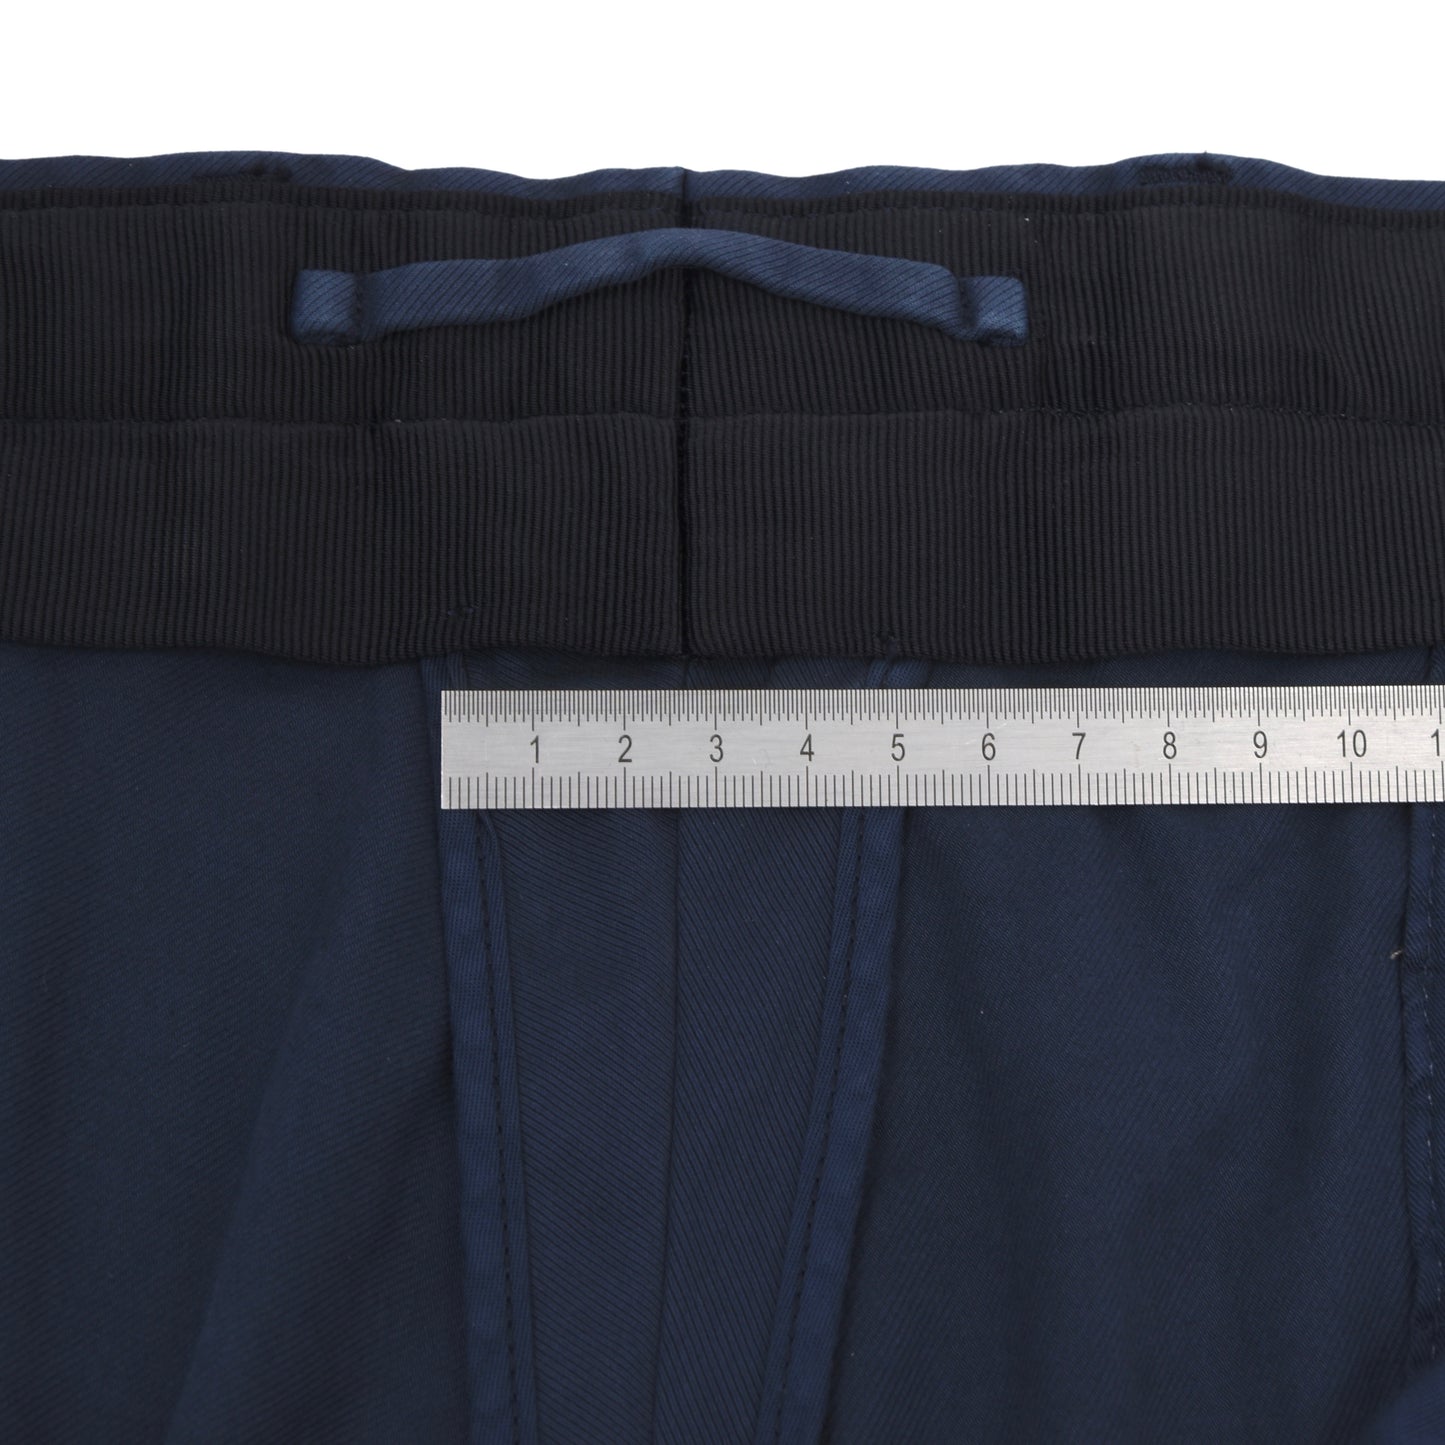 NWT Incotex Tight Fit High Comfort Pants Size 58L - Navy Blue